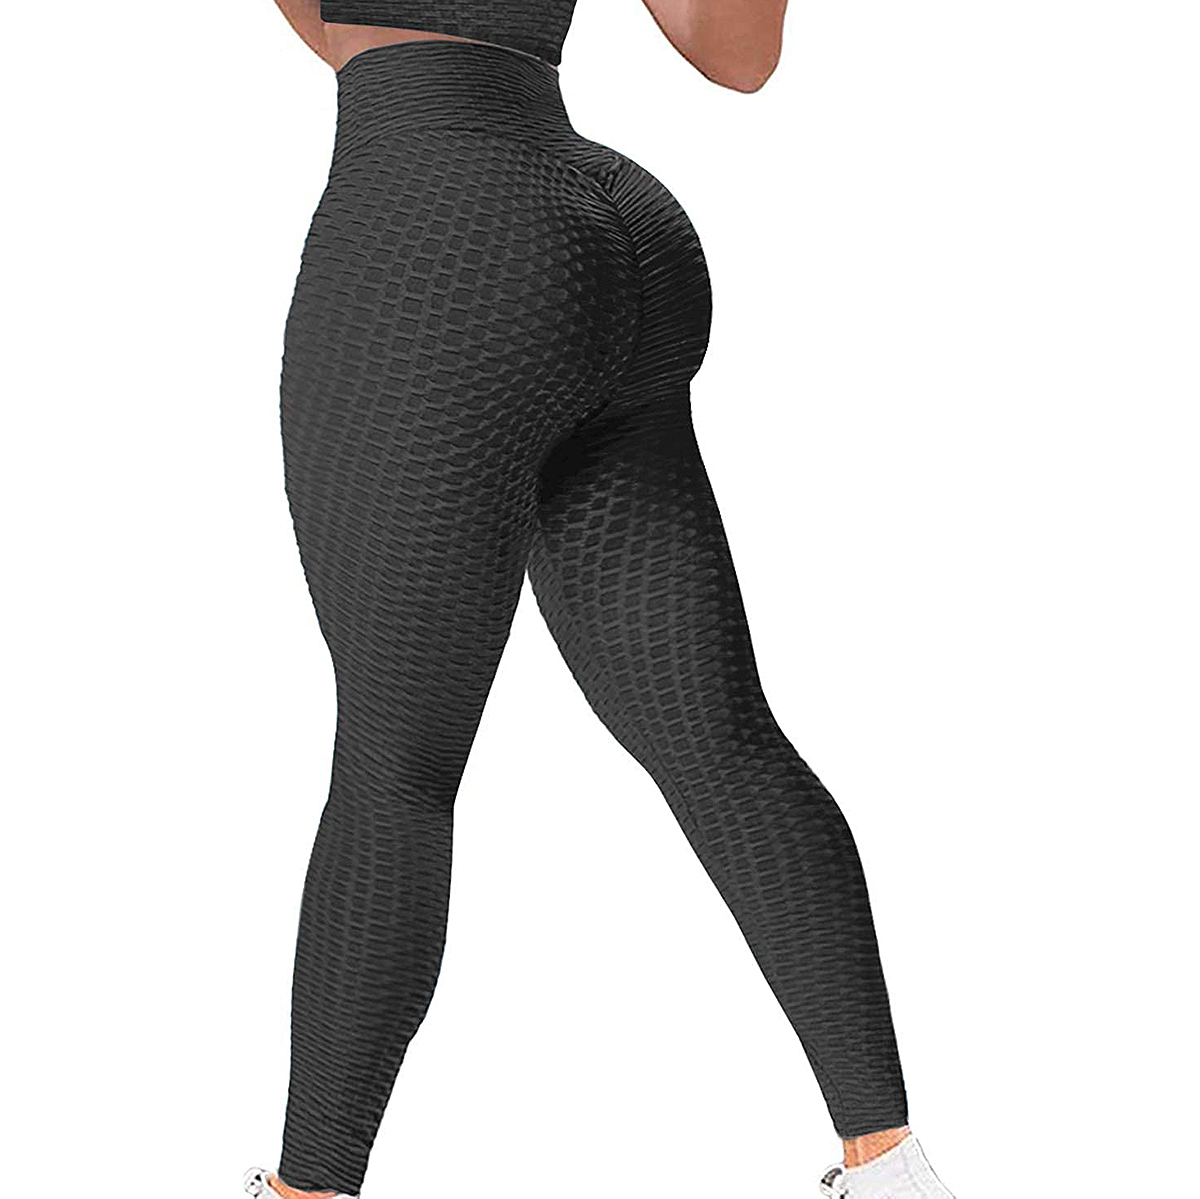 The Perfect Sculpt Anti Cellulite Compression Workout Leggings for Women